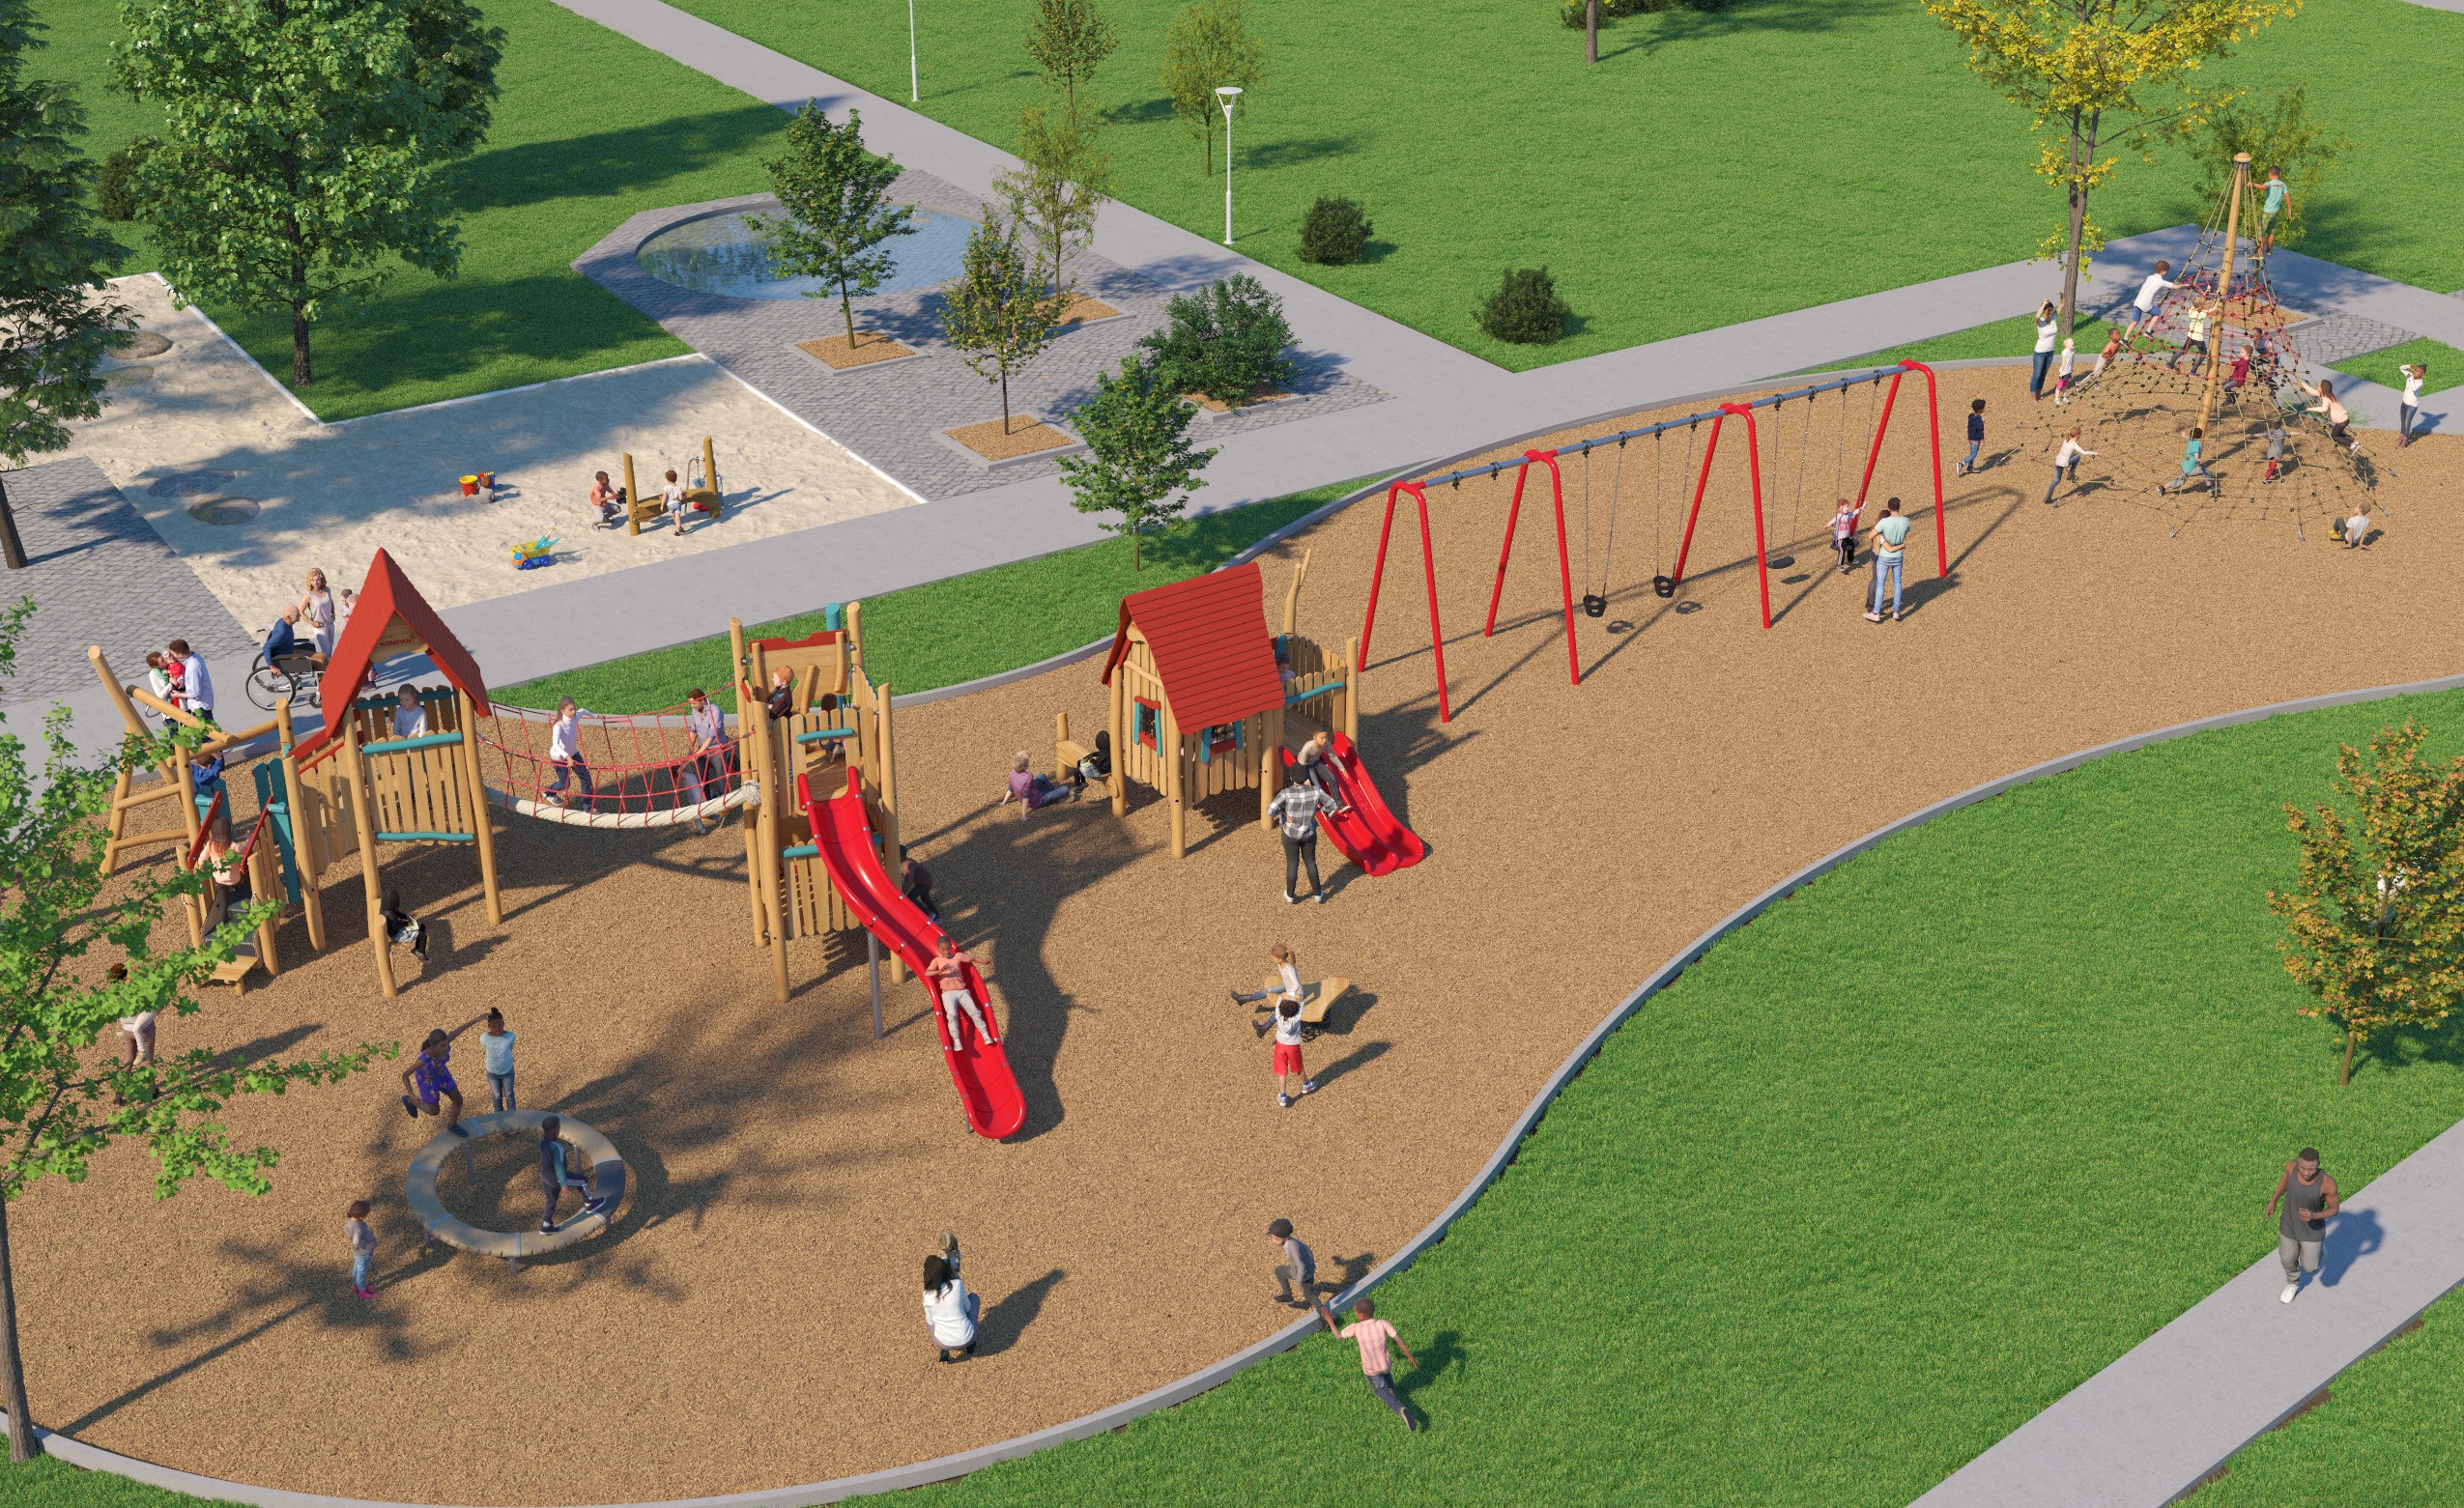 The final design for the new Eden Valley Park Playground, which has been refined based on community feedback. It will include natural wood and red slides and accents and will include the play features listed below.